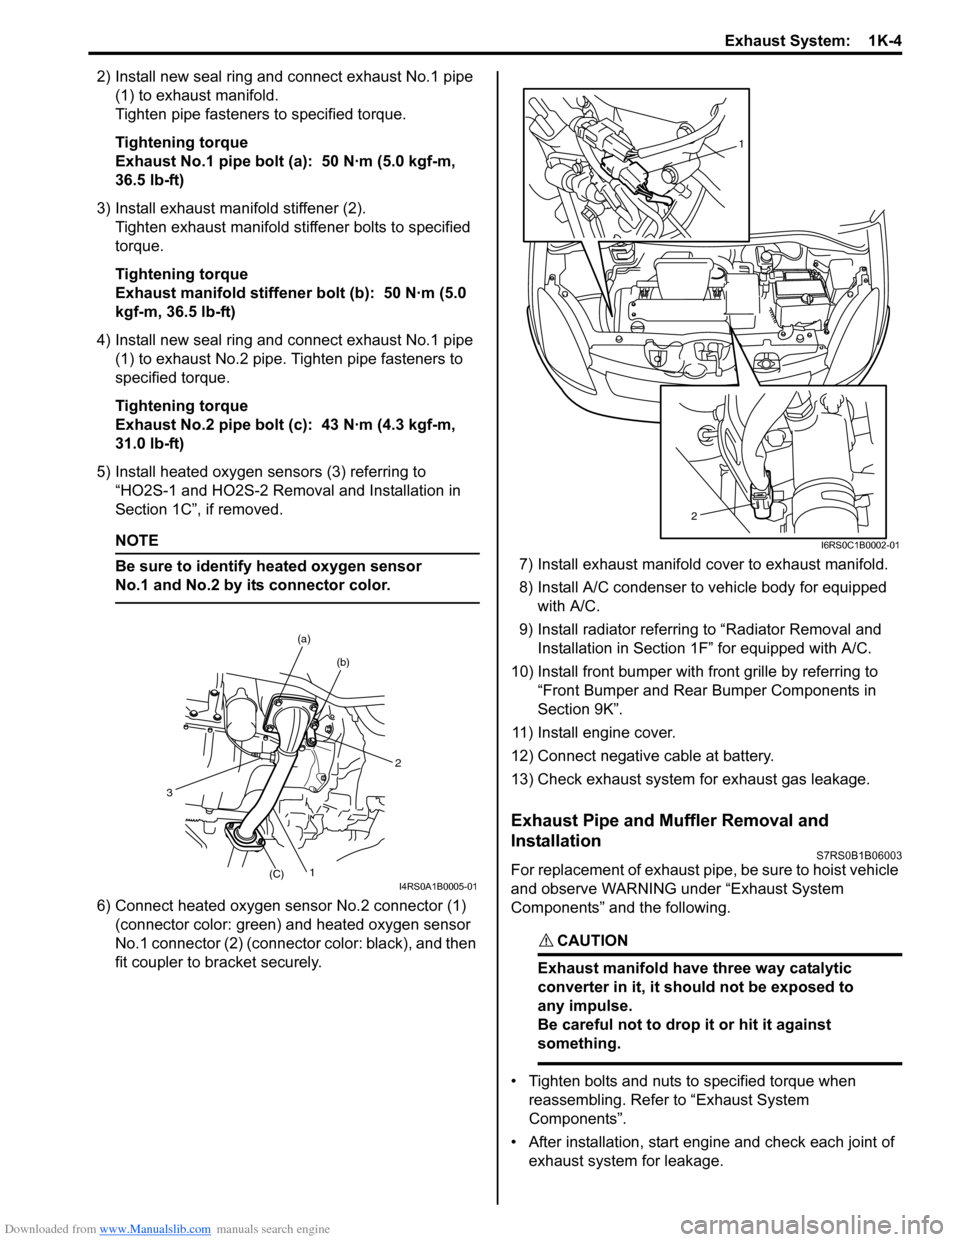 SUZUKI SWIFT 2004 2.G Service Workshop Manual Downloaded from www.Manualslib.com manuals search engine Exhaust System:  1K-4
2) Install new seal ring and connect exhaust No.1 pipe (1) to exhaust manifold.
Tighten pipe fasteners to specified torqu